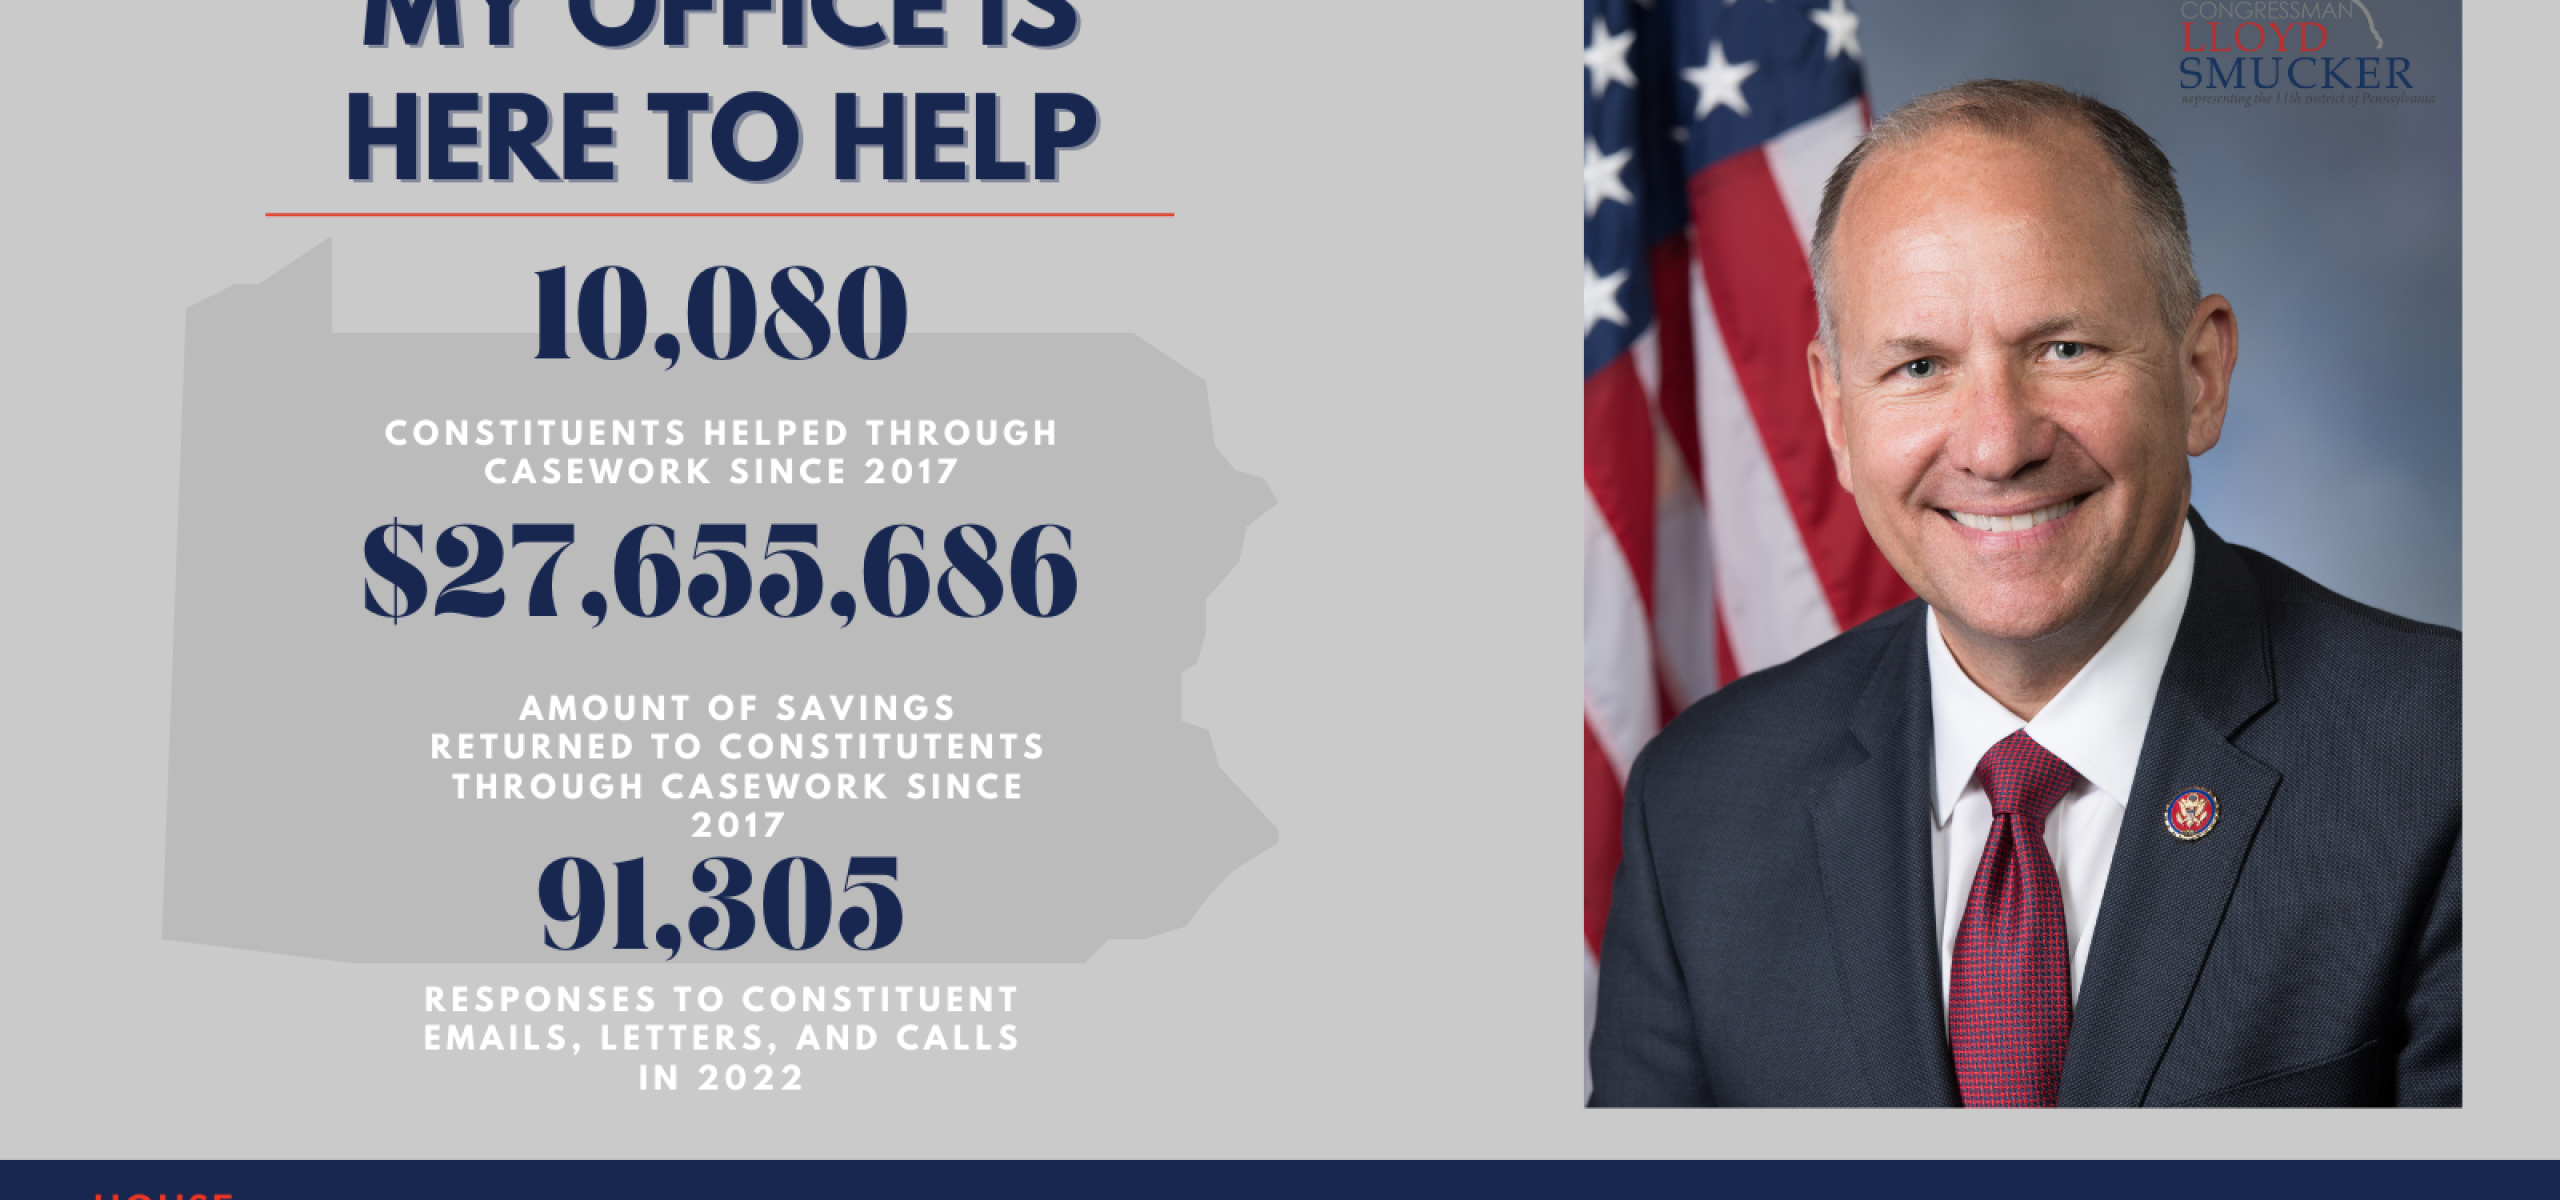 An image describing the amount of constituent inquiries, federal agency requests for assistance, which have been responded to by Rep. Smucker and his staff.